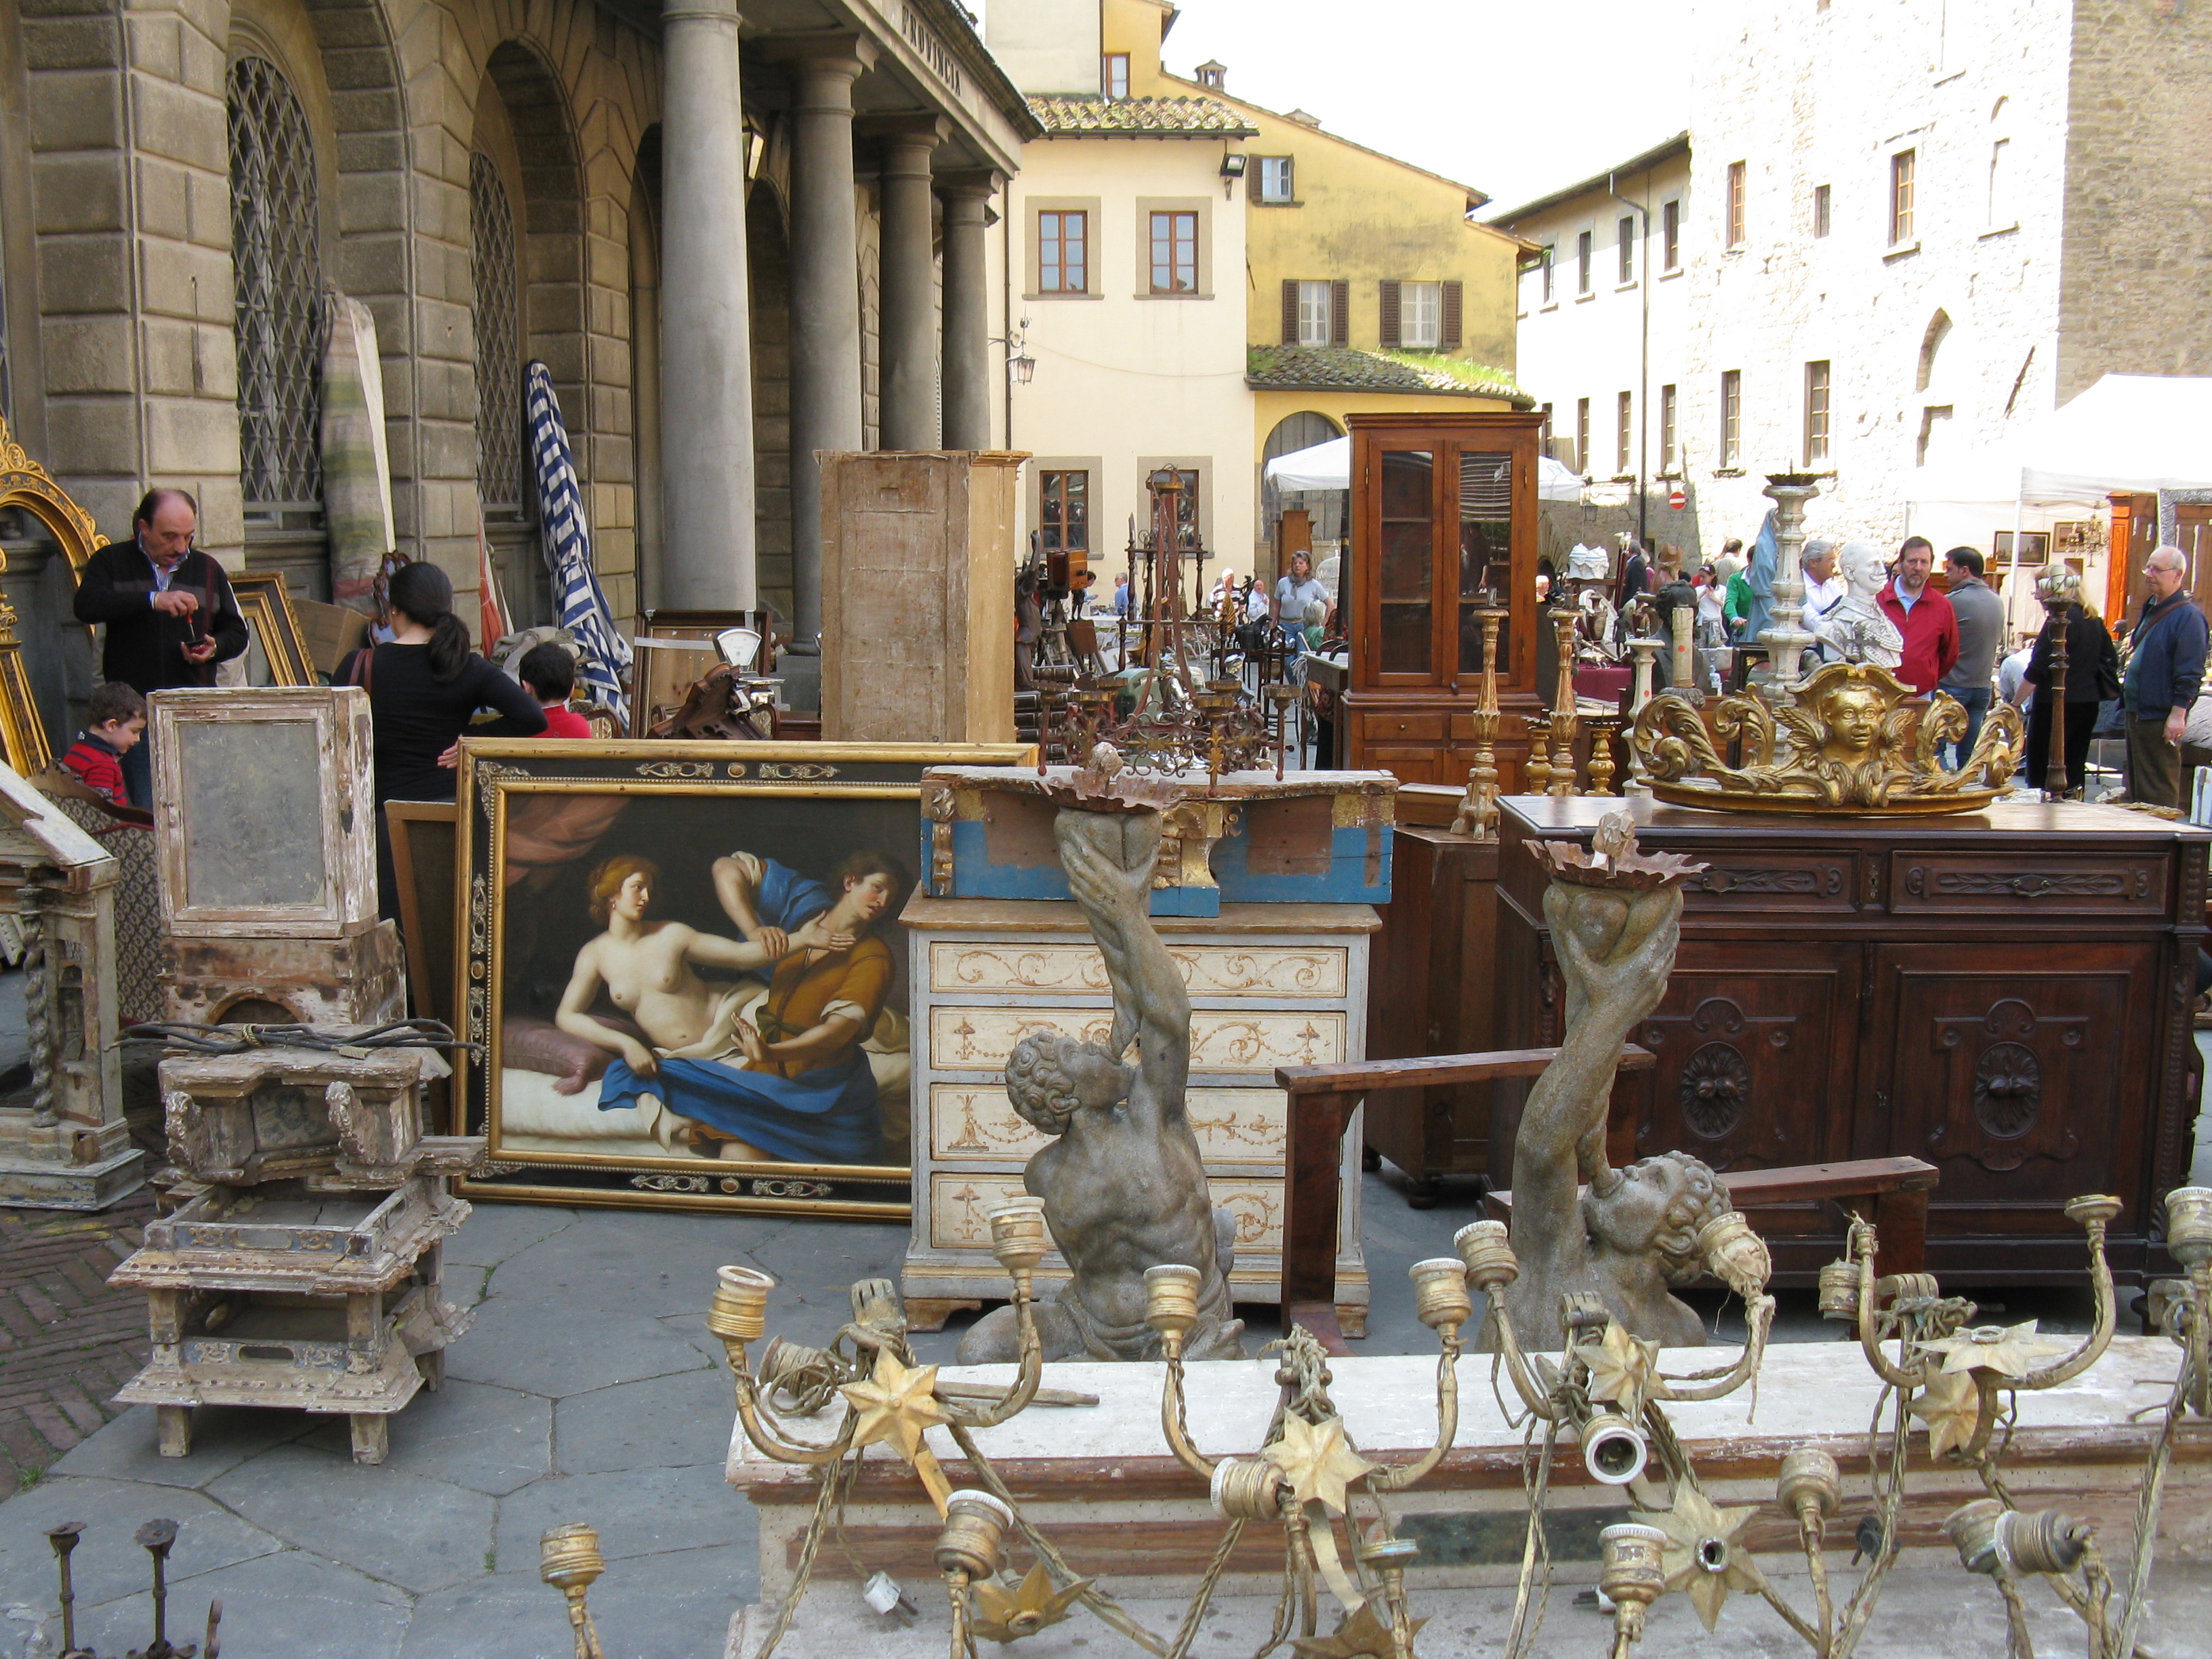 Every piece has a story at the Arezzo Antique Market